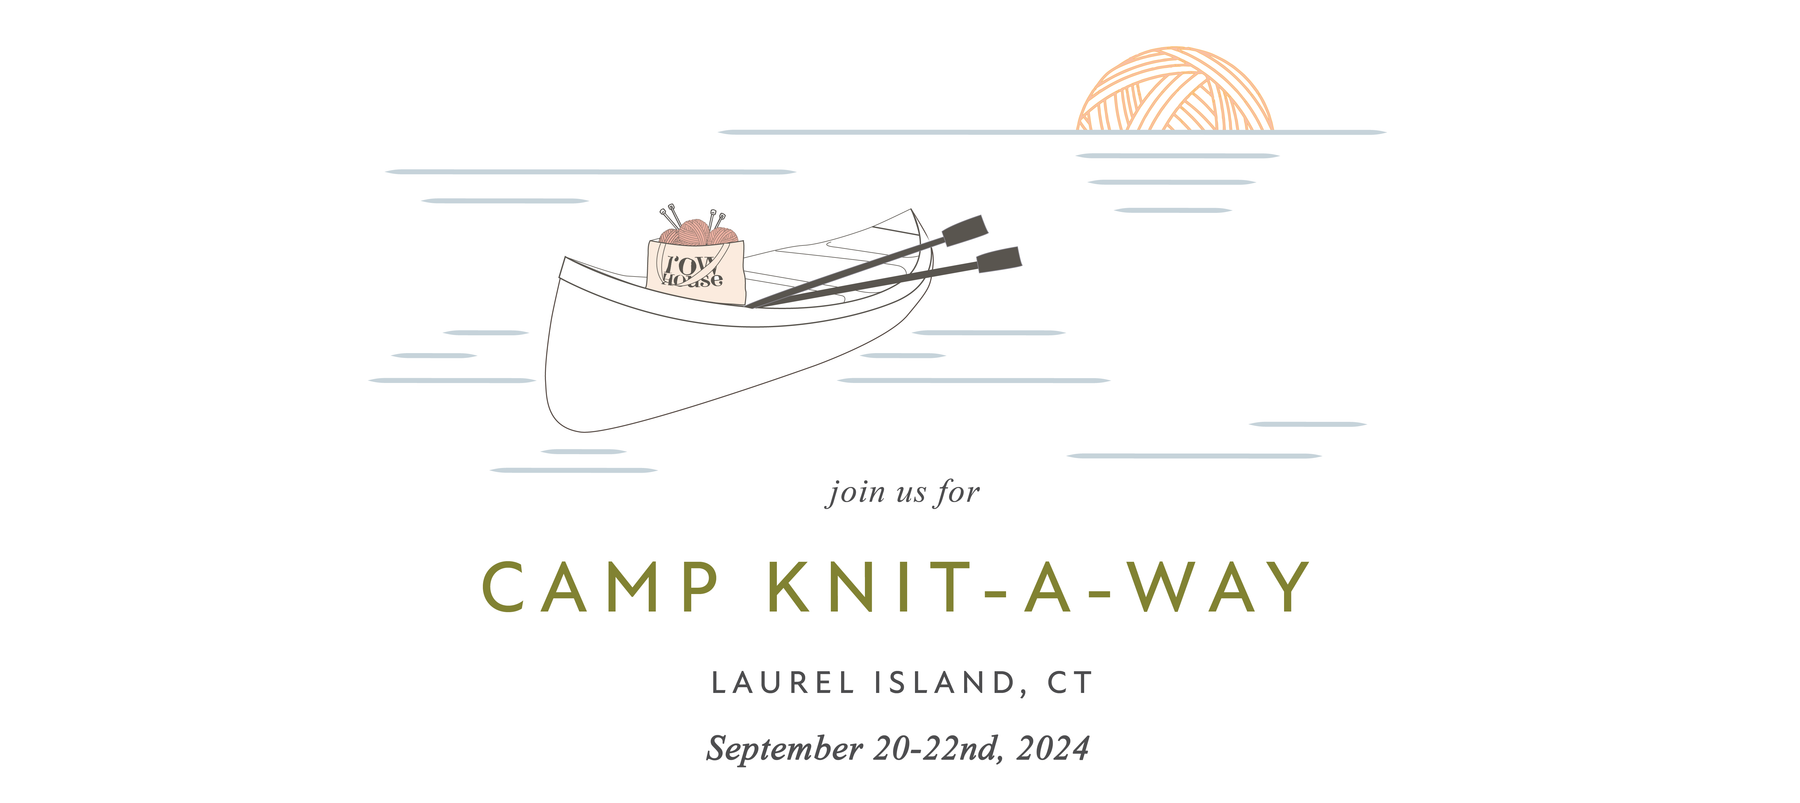 Join us for Camp Knit-a-way with Romi Hill in September!